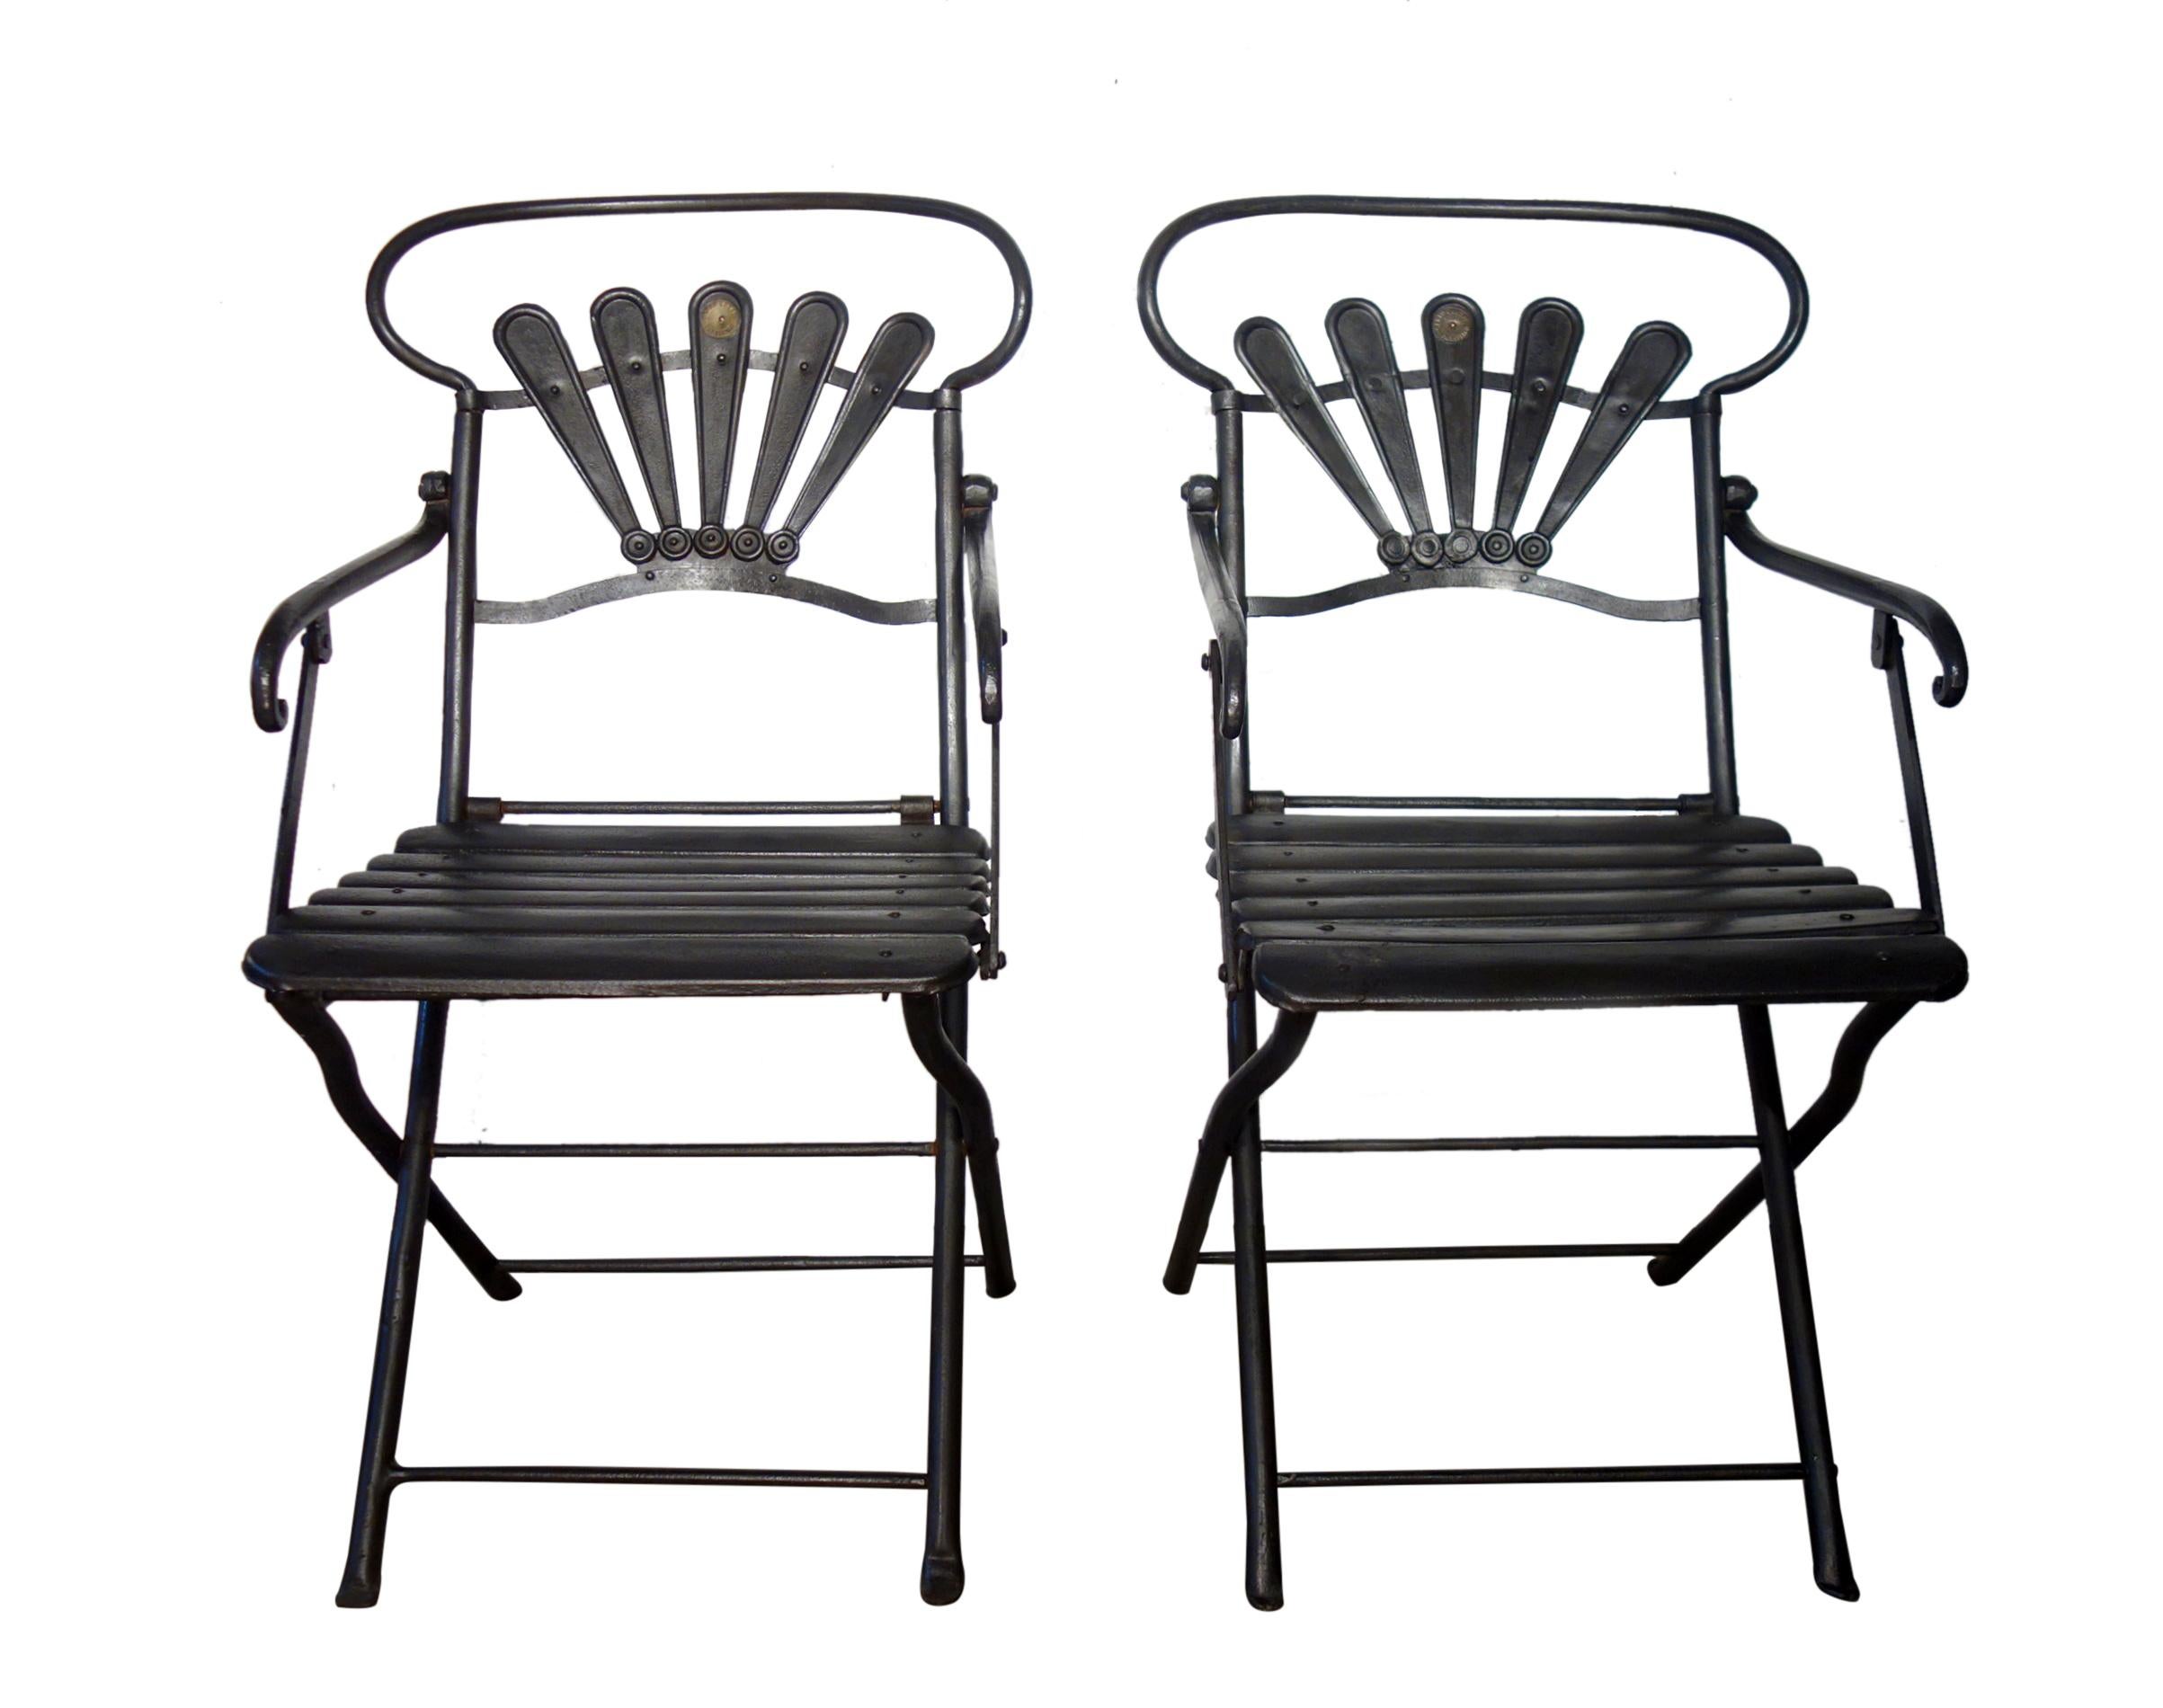 Comfortable pair of Carlo Crespi wrought iron folding armchairs, handcrafted in the Village of Parabiago, Milan Italy.

The style details are superb: the curved chair back orb, the fanned back support with Carlo Crespi medallion, the sculpted &